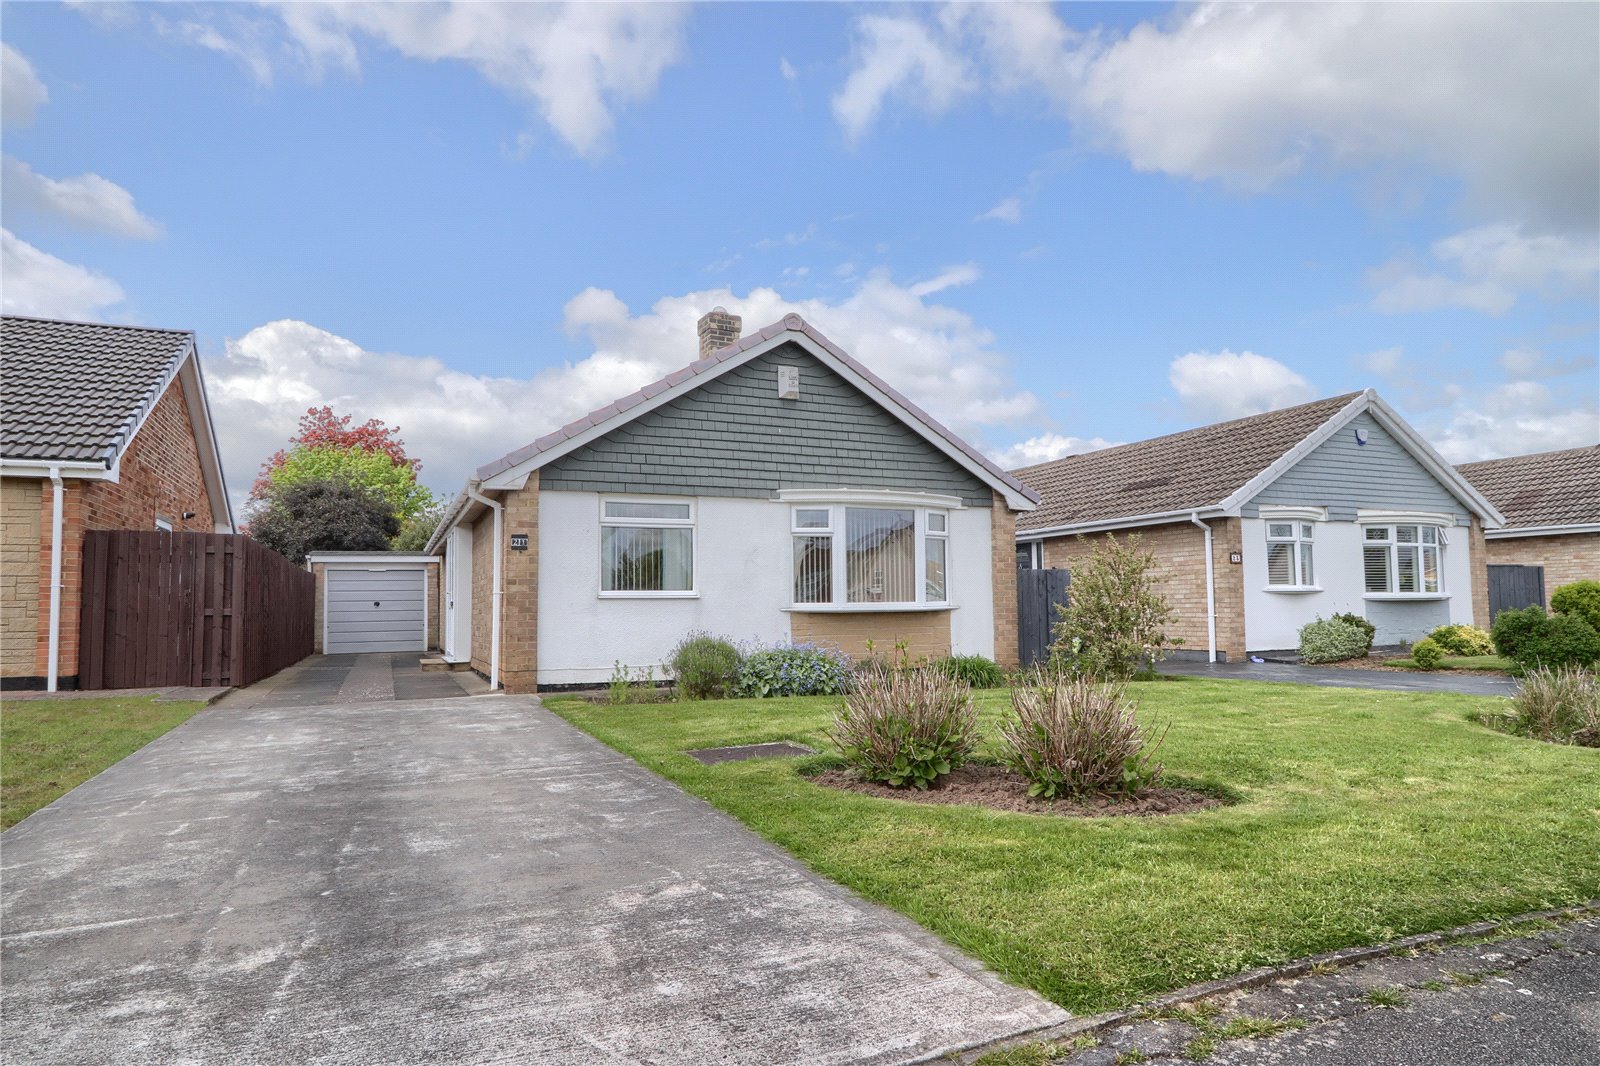 3 bed bungalow for sale in Barlborough Avenue, Whitehouse Farm - Property Image 1